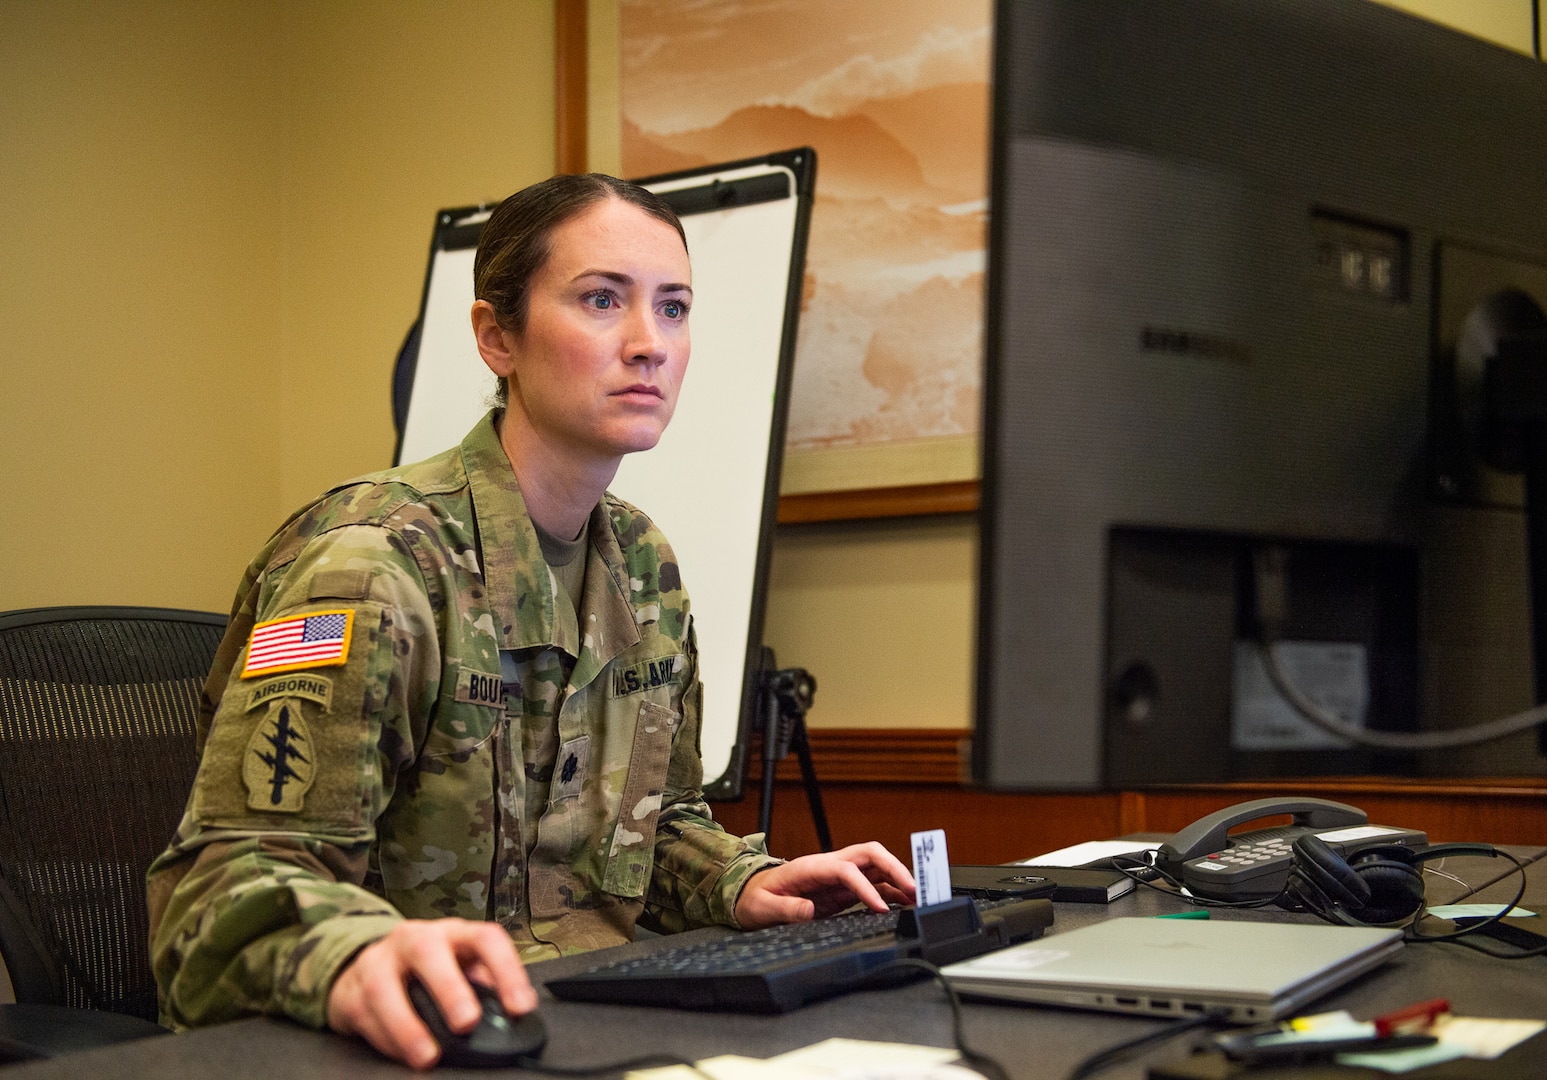 U.S. Army Lt. Col. Jill Bourque, Deputy Chief of Staff of Joint Task Force-Red Hill (JTF-RH), works on her computer on Ford Island, Hawaii March 21, 2023. JTF-RH is in phase three of its five-phase defueling plan. Personnel are focused on completing repairs, quality control tasks, training, response preparation, the National Environmental Policy Act (NEPA) Environmental Assessment (EA), regulatory approvals and operational planning for such things as dewatering, repacking, and defueling. This extensive preparatory work will help ensure the safe and expeditious defueling of the RHBFSF. (U.S. Navy photo by Mass Communication Specialist 2nd Class Allayah Klein)